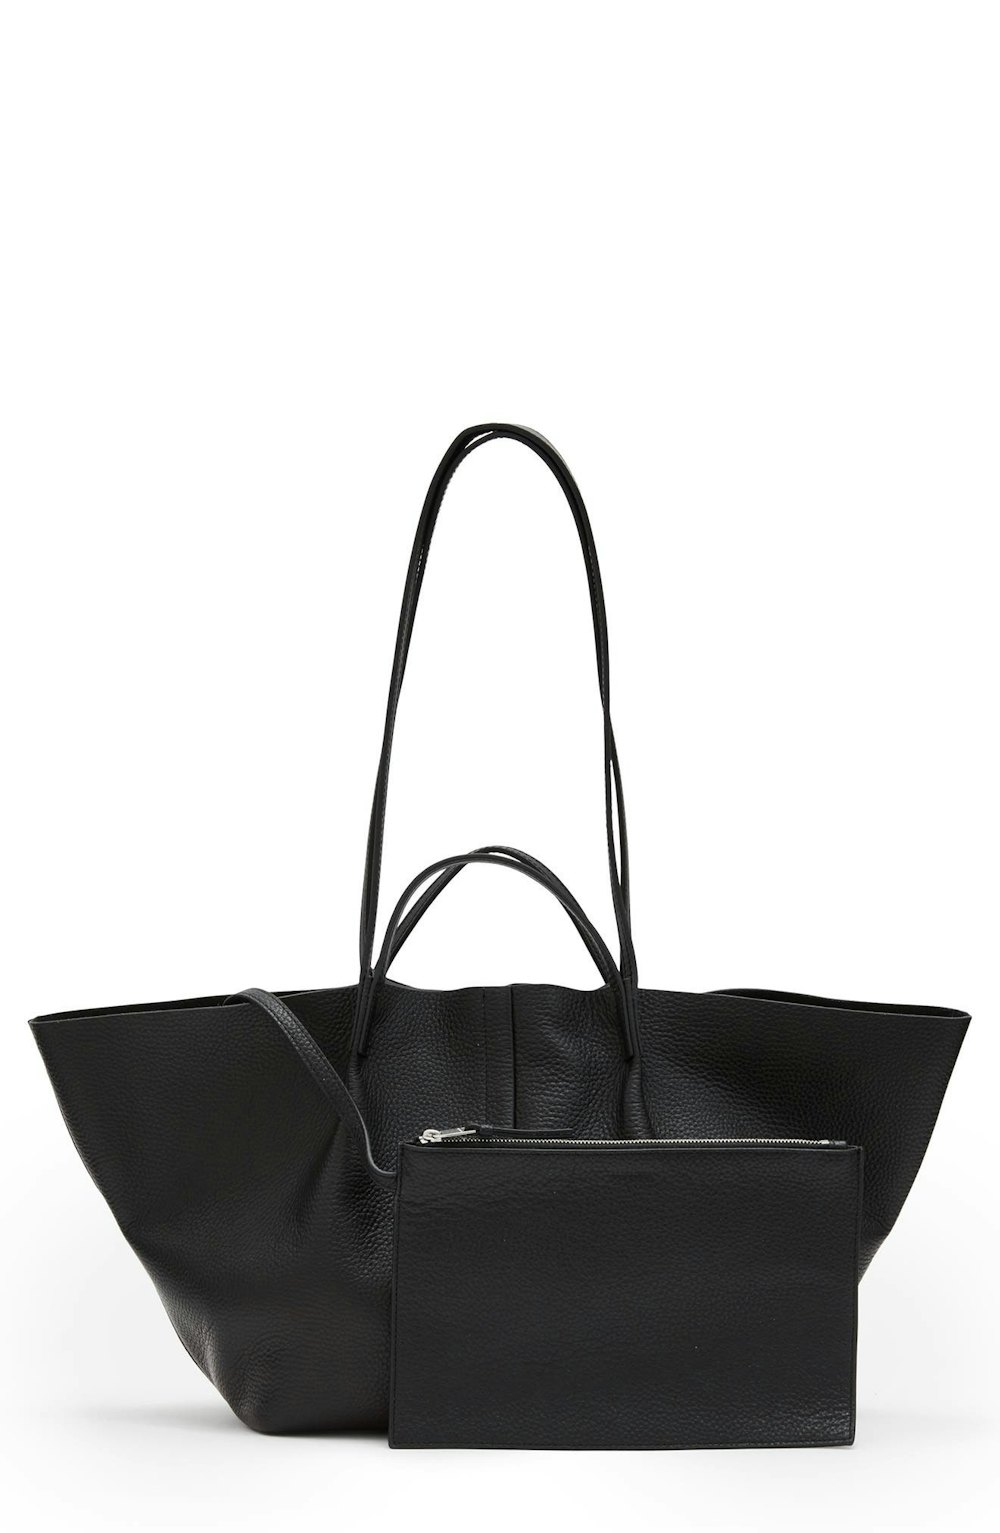 Odette East/West Leather Tote